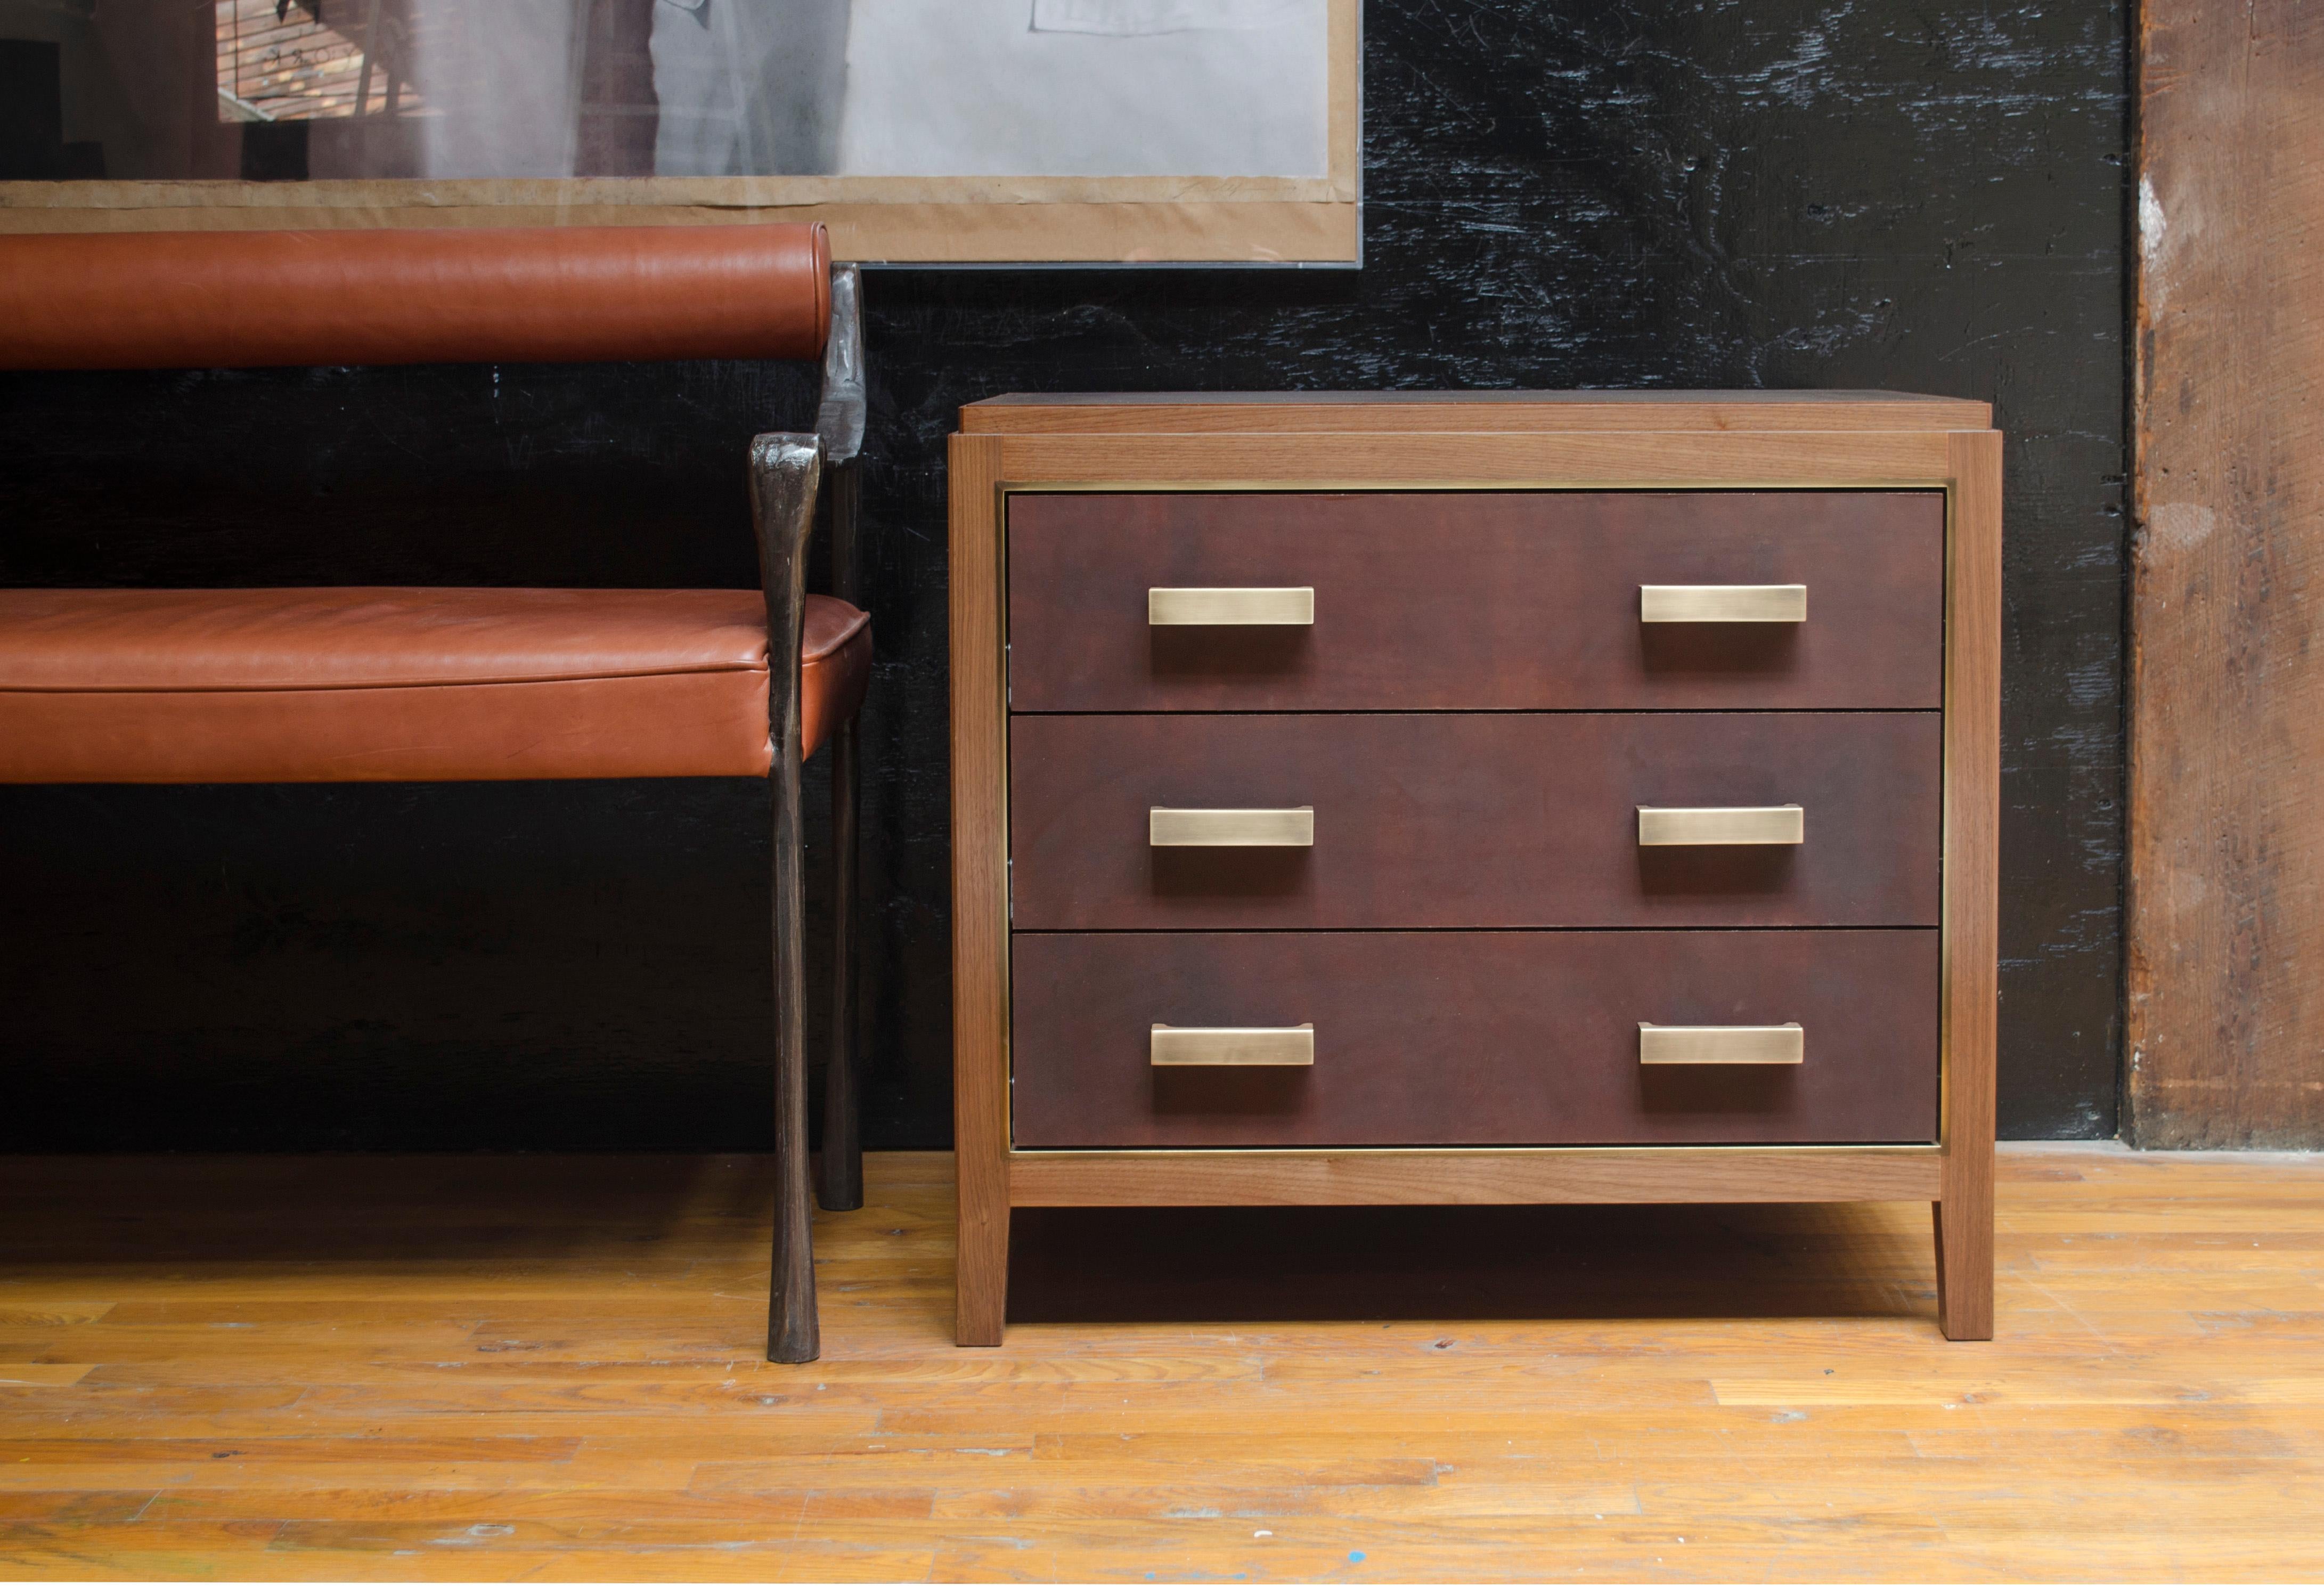 Solid walnut construction featured with three drawers. Wood options also include oak or wenge. Configuration options also include single or two drawers with open shelving. Brass trim and hand-dyed saddle leather drawer fronts and blotter. Leather